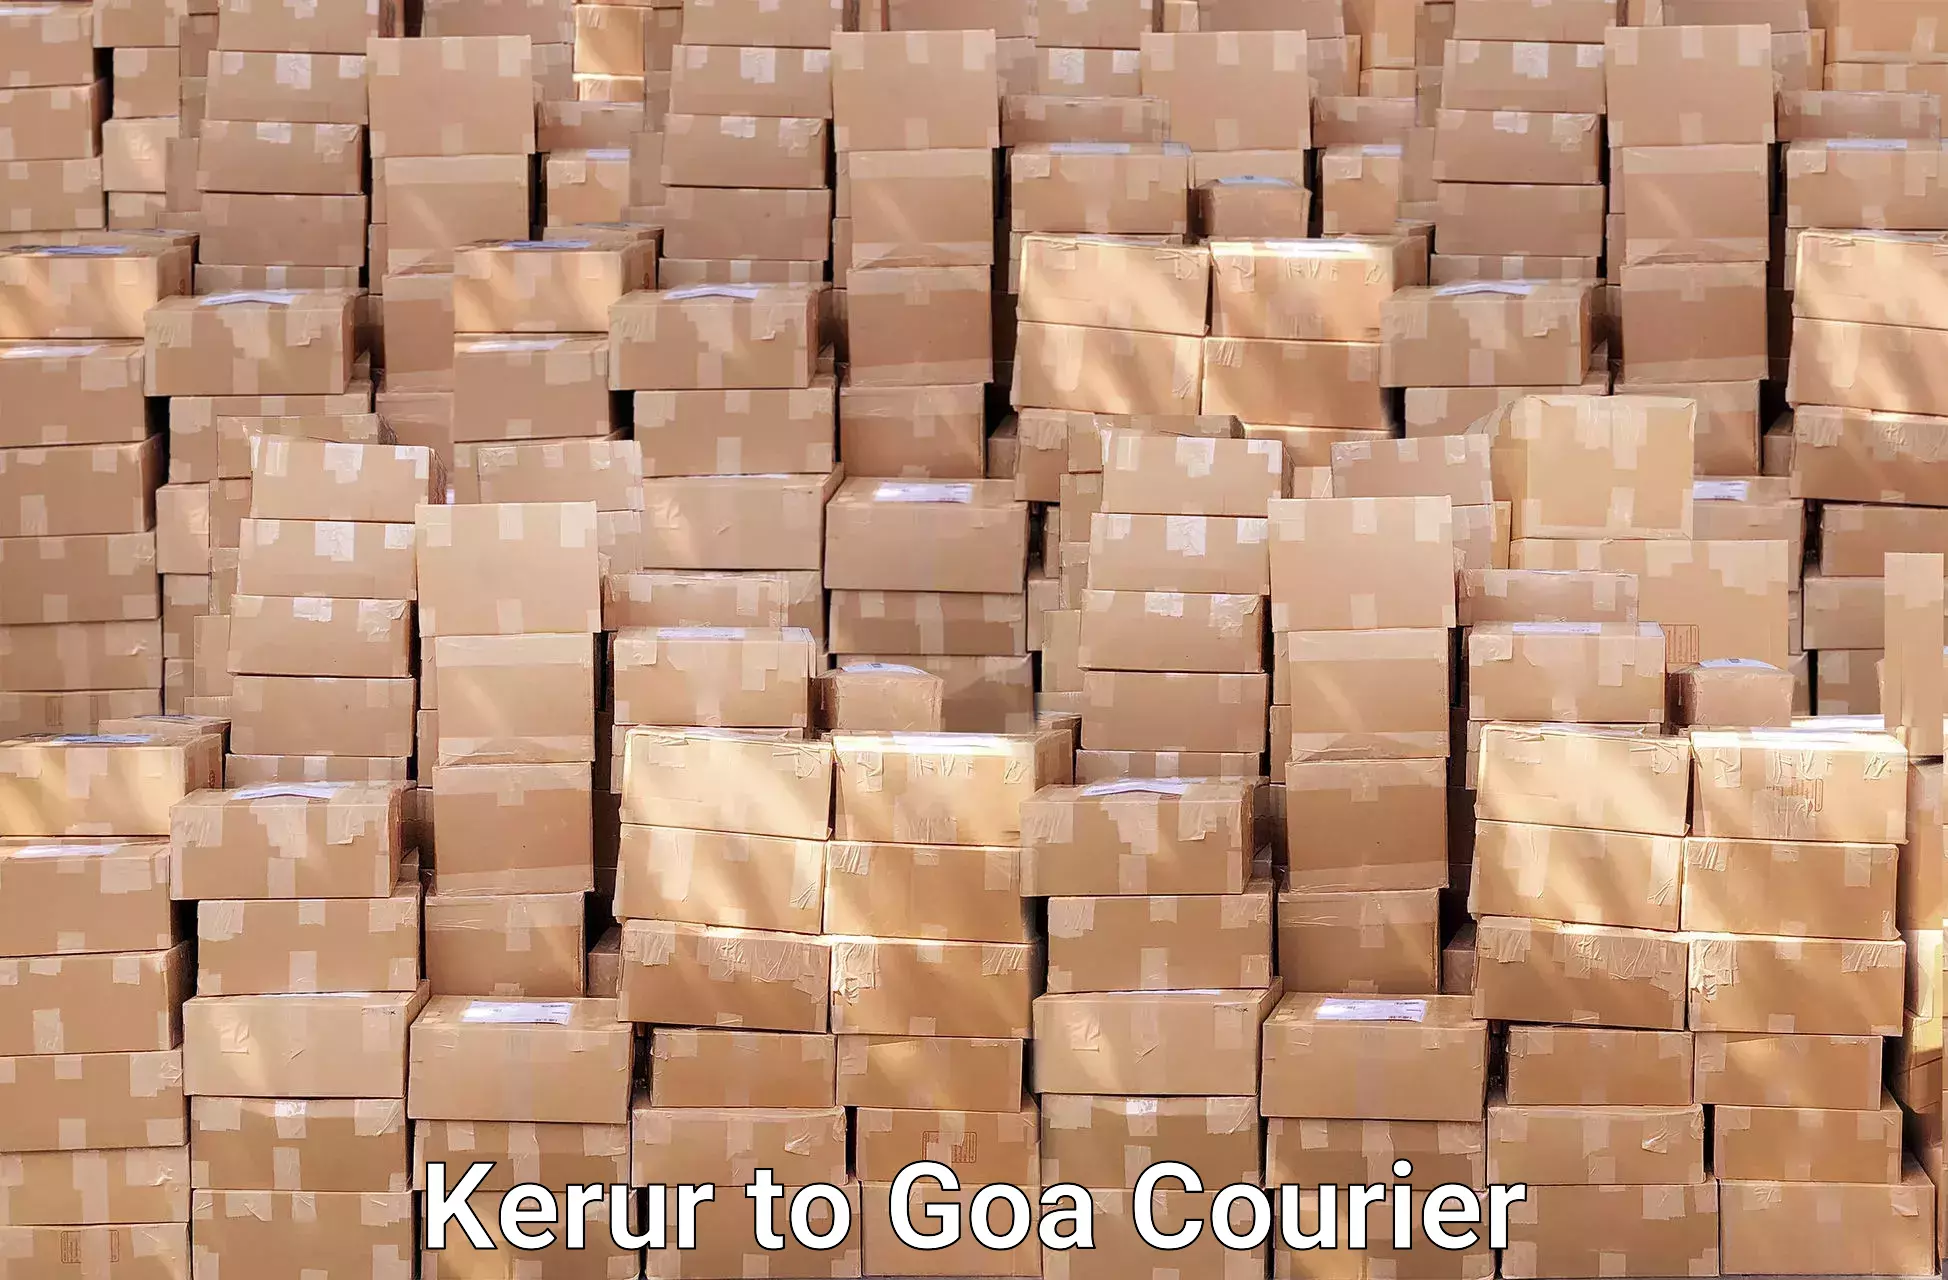 Efficient packing and moving Kerur to Panaji